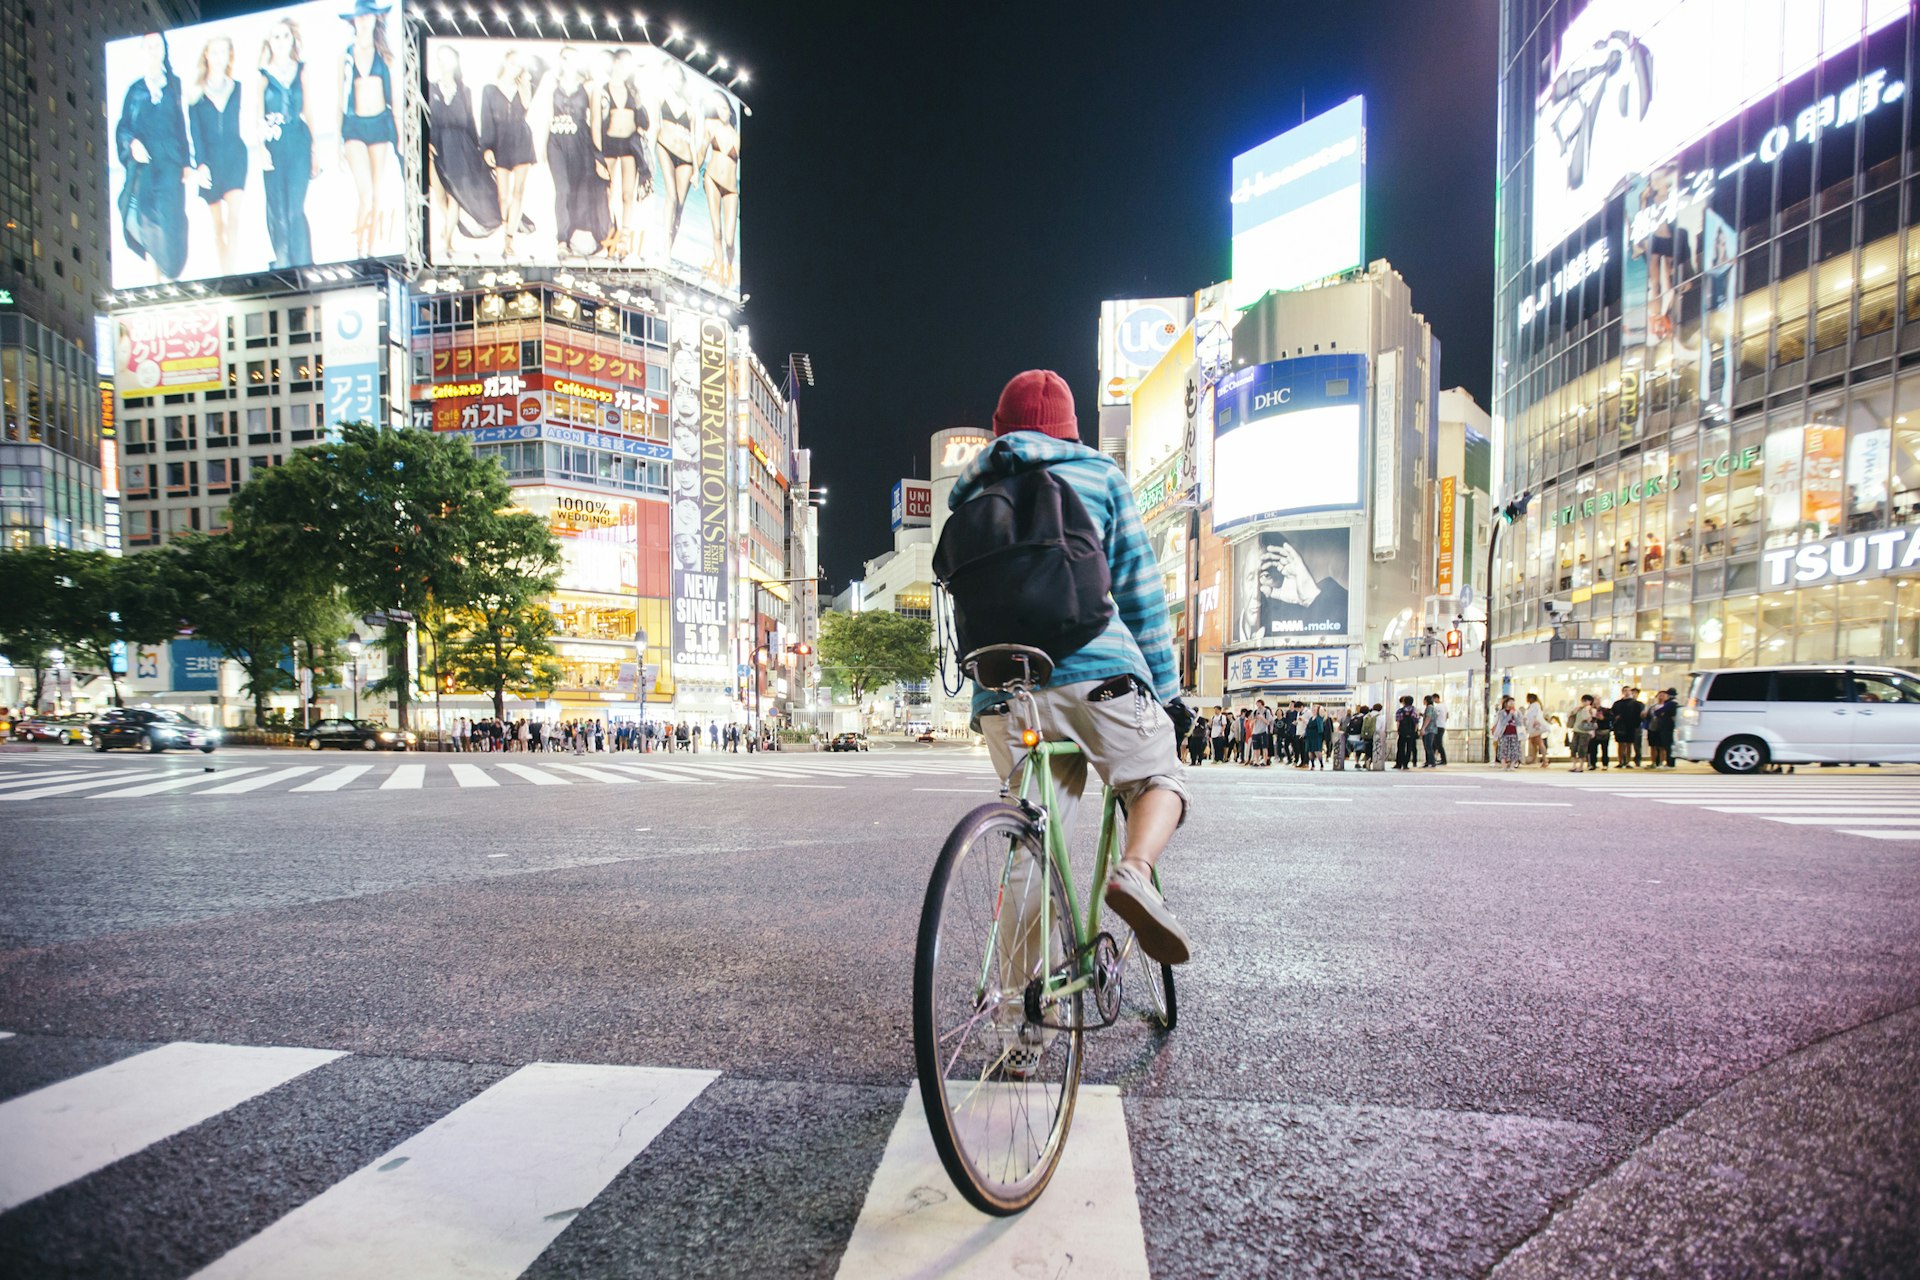 Young guy with backpack riding a bike on a huge city center road crossing in a build-up area at night